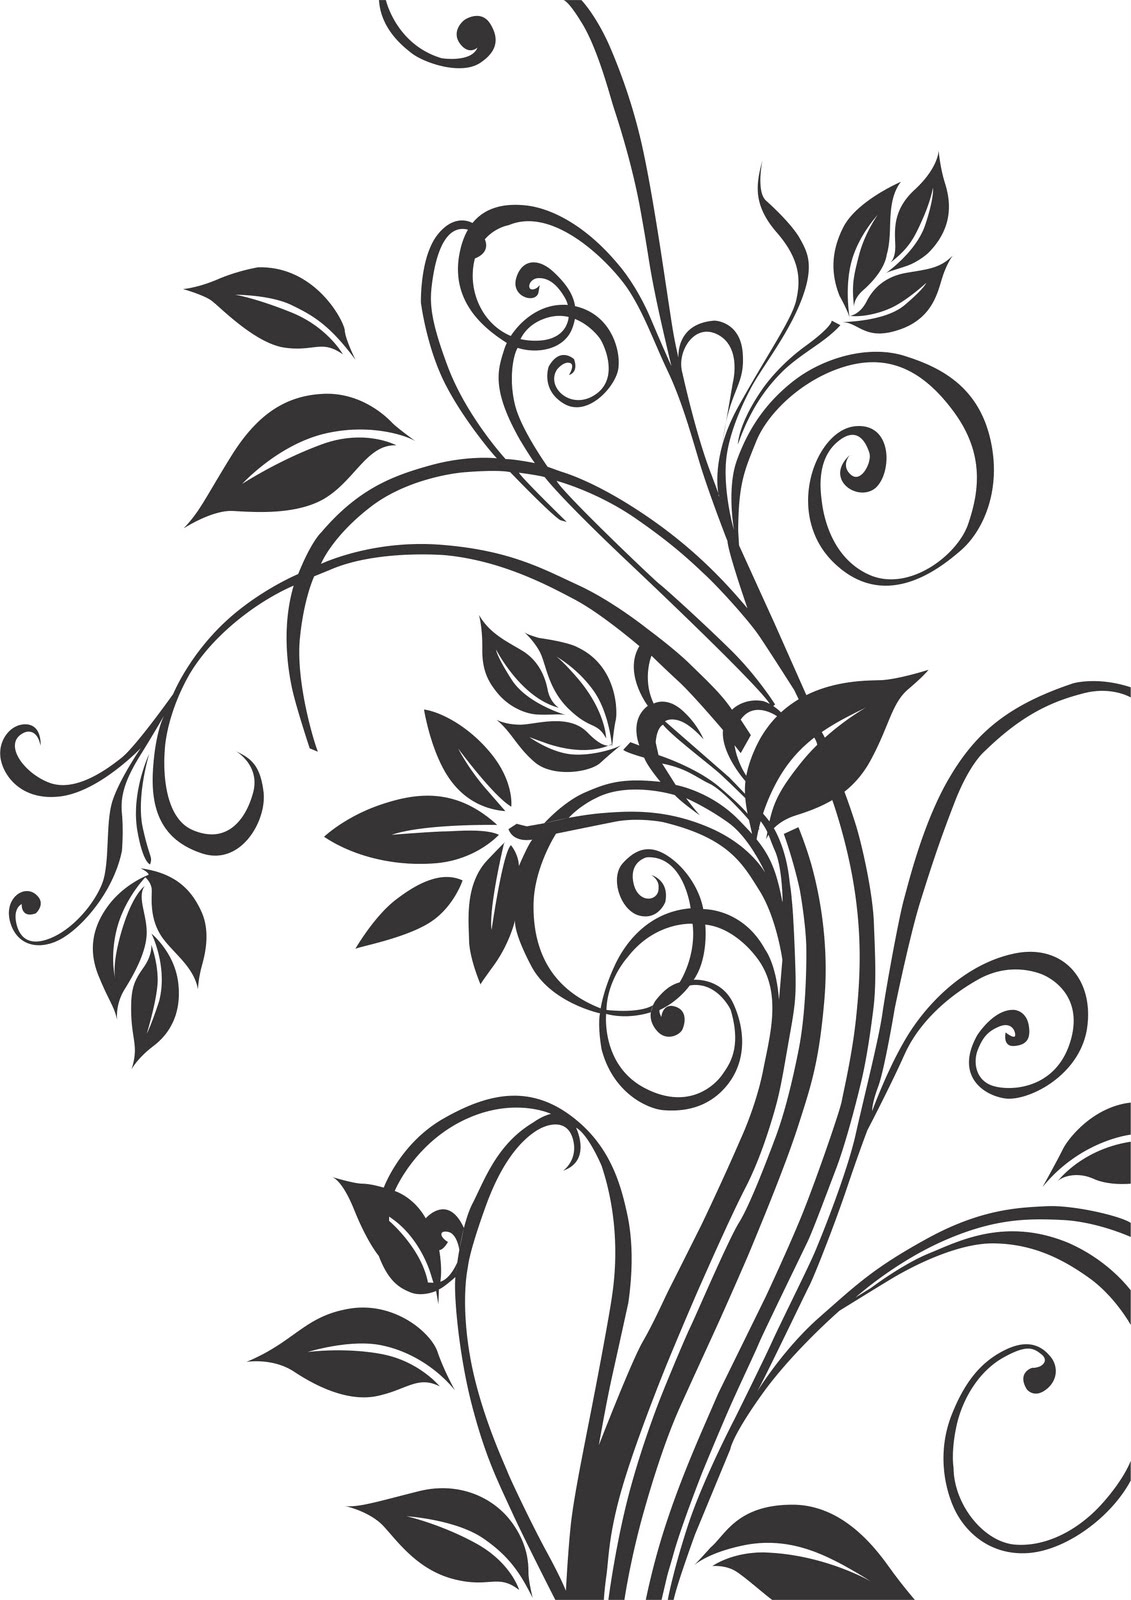 free vector clipart patterns - photo #25